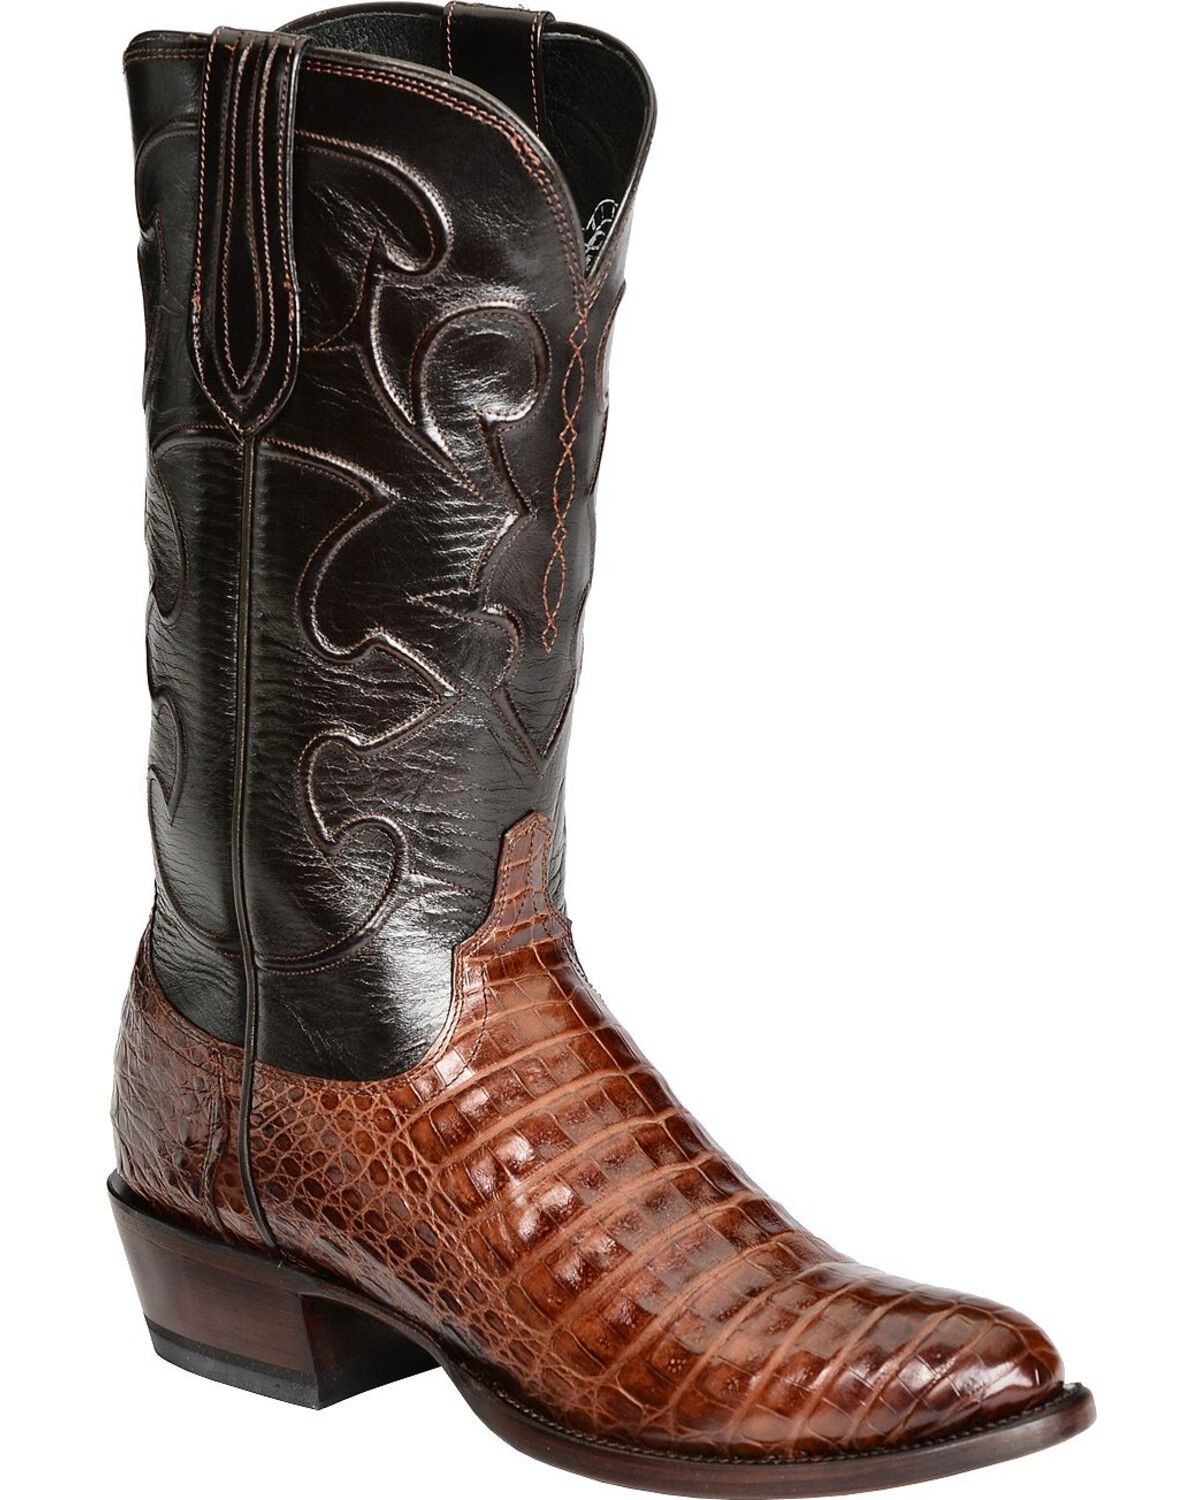 lucchese boots on sale